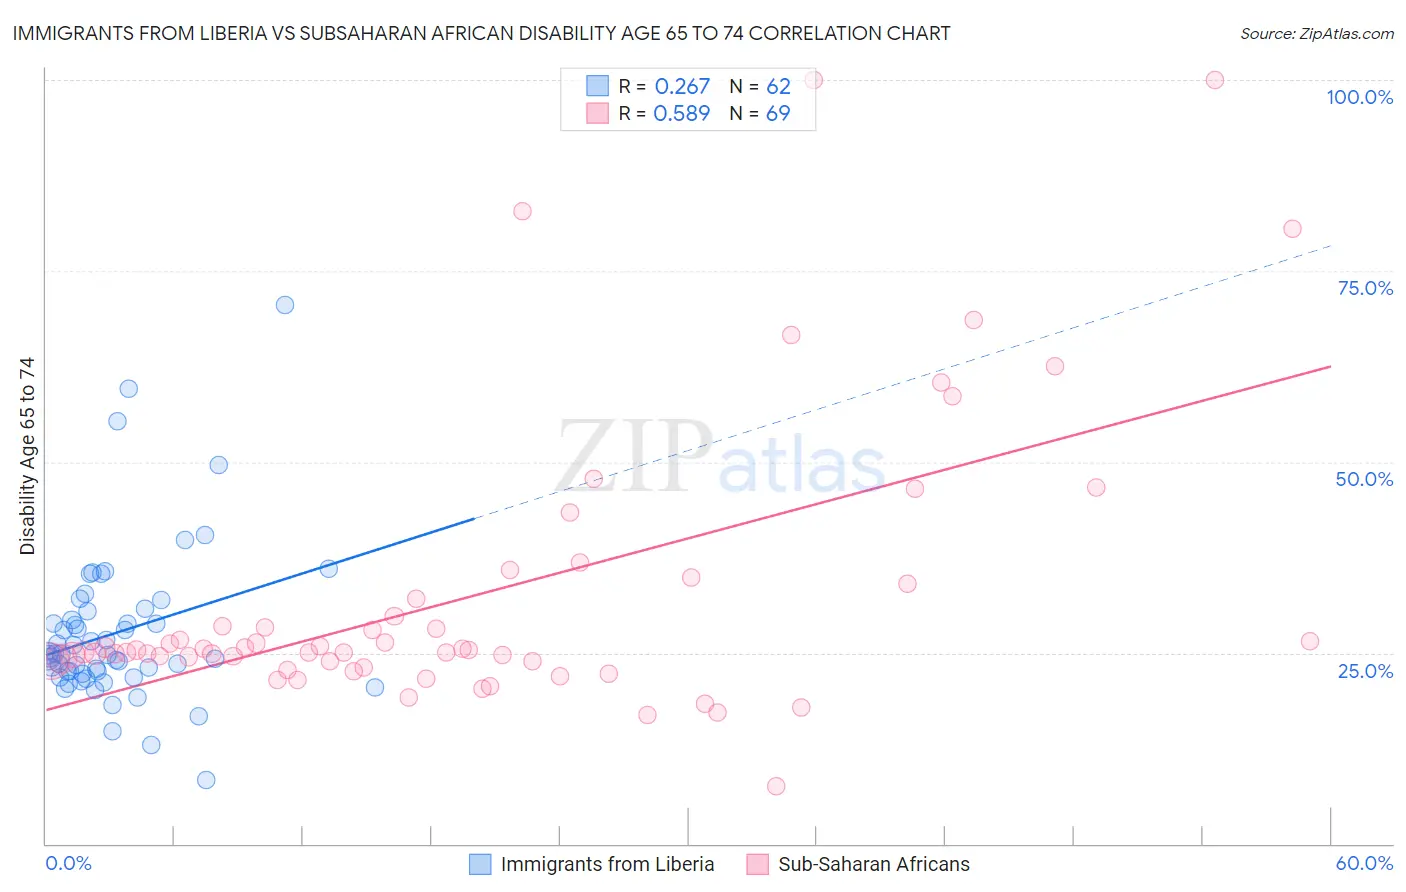 Immigrants from Liberia vs Subsaharan African Disability Age 65 to 74